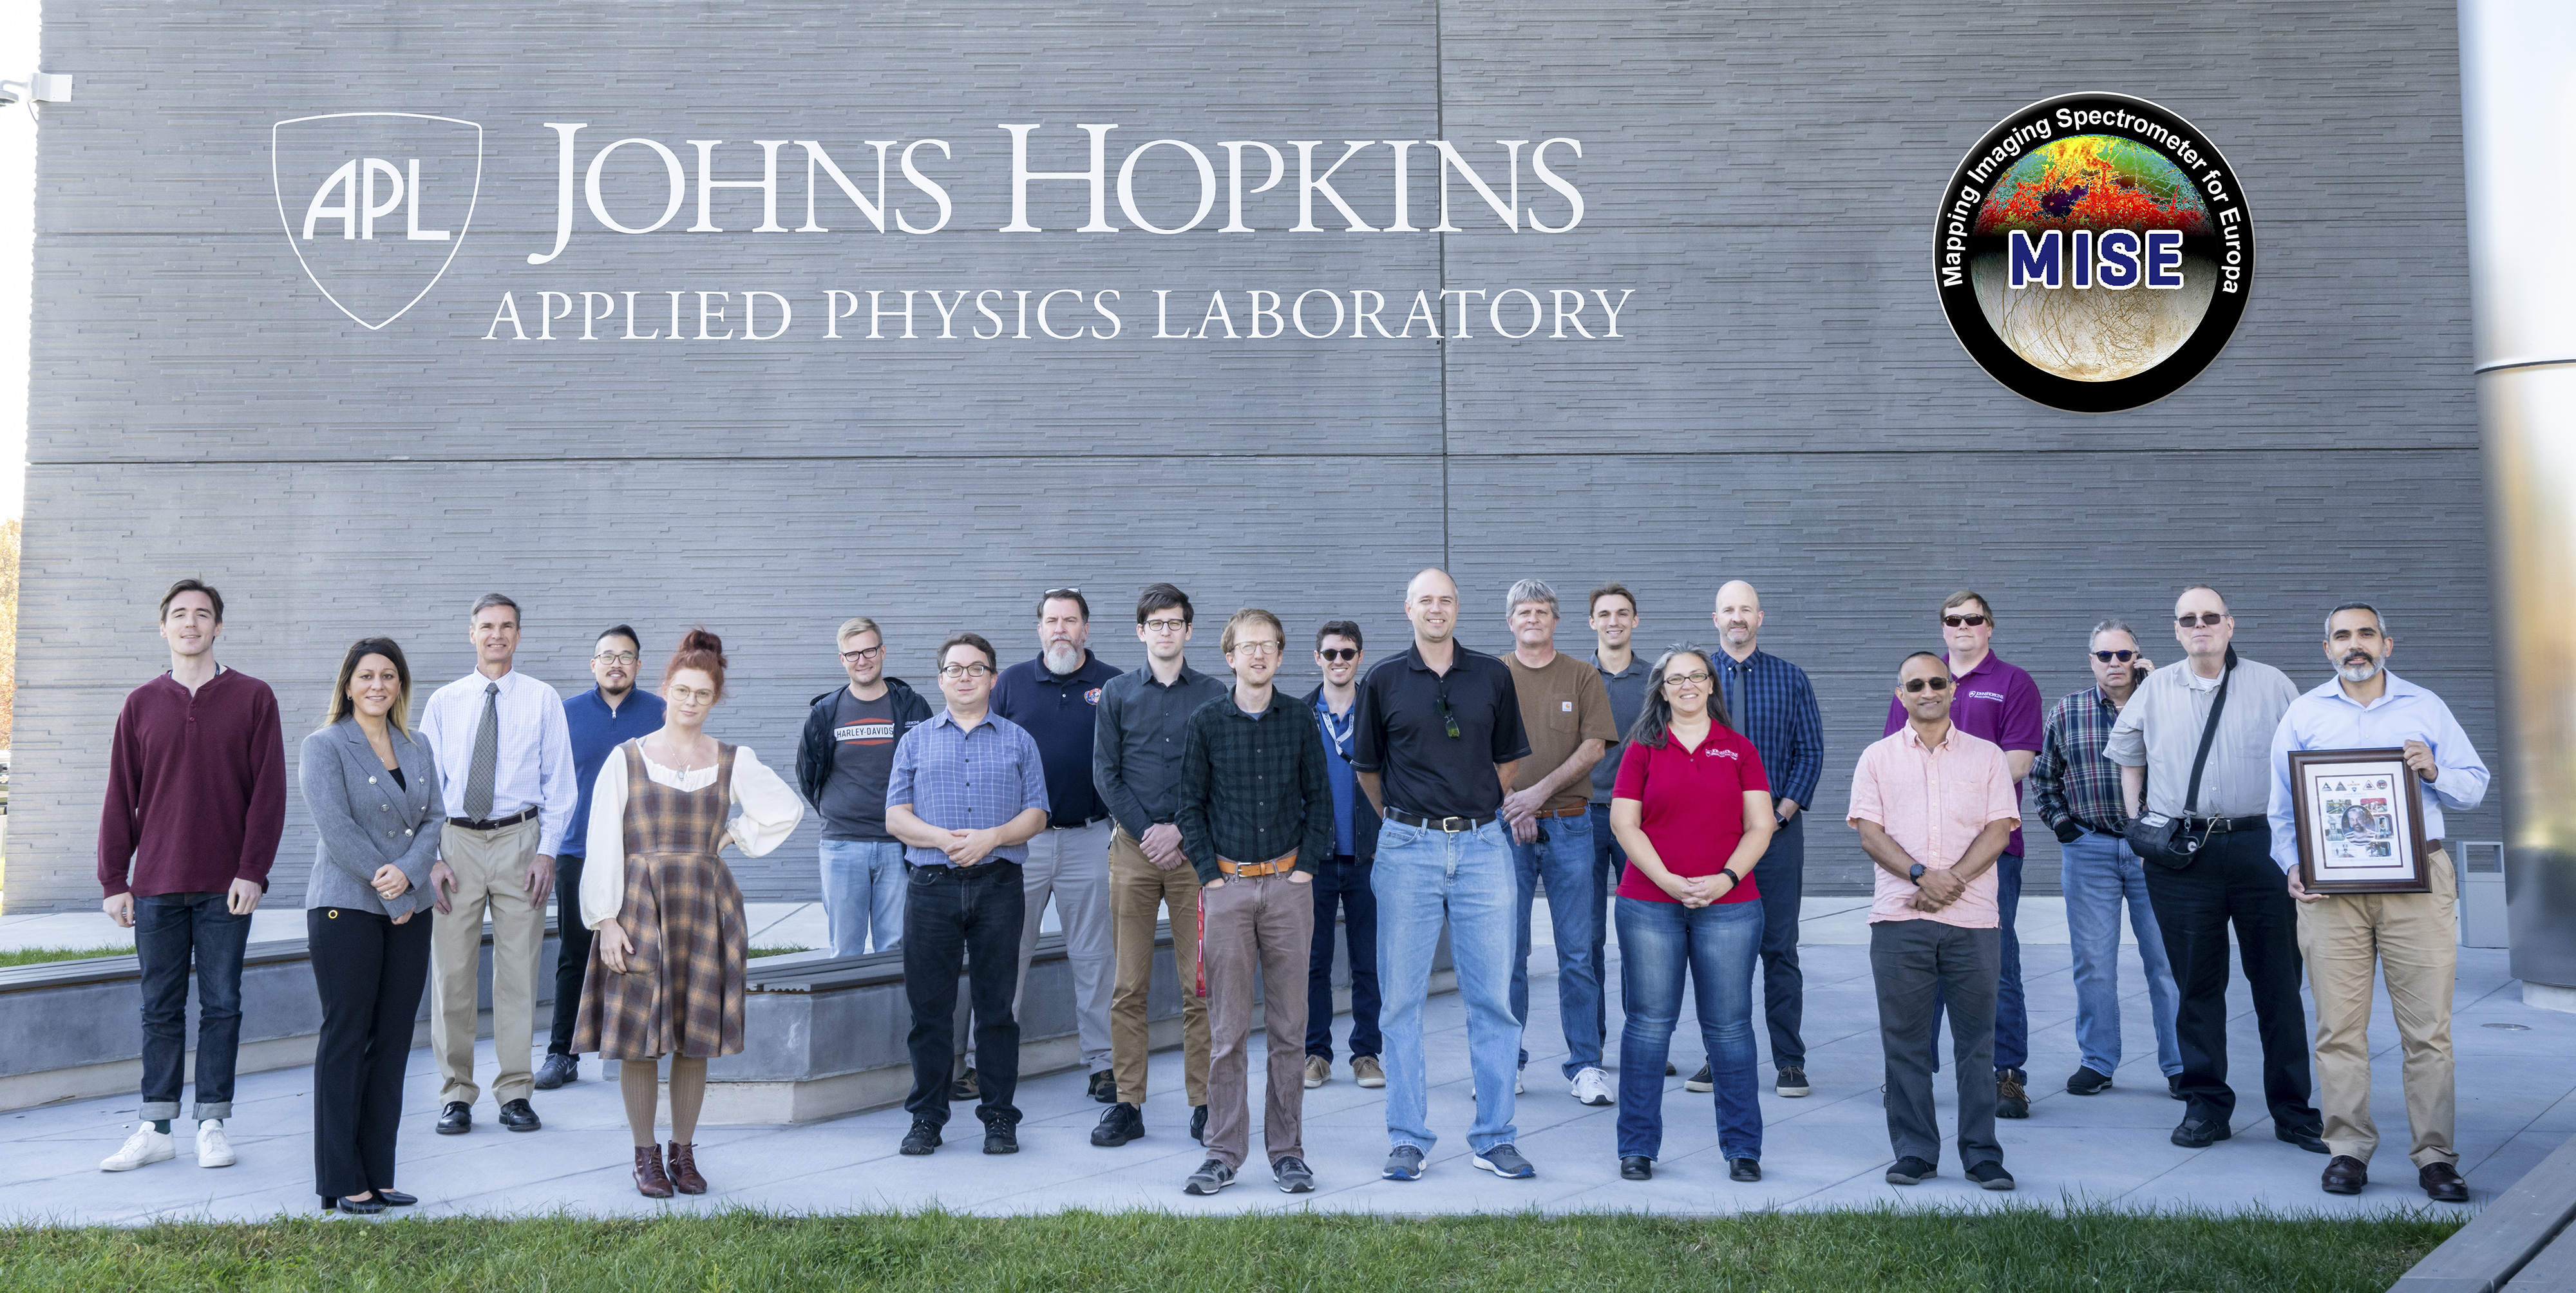 People stand outside of a building with Johns Hopkins Applied Physics Laboratory branded on its wall